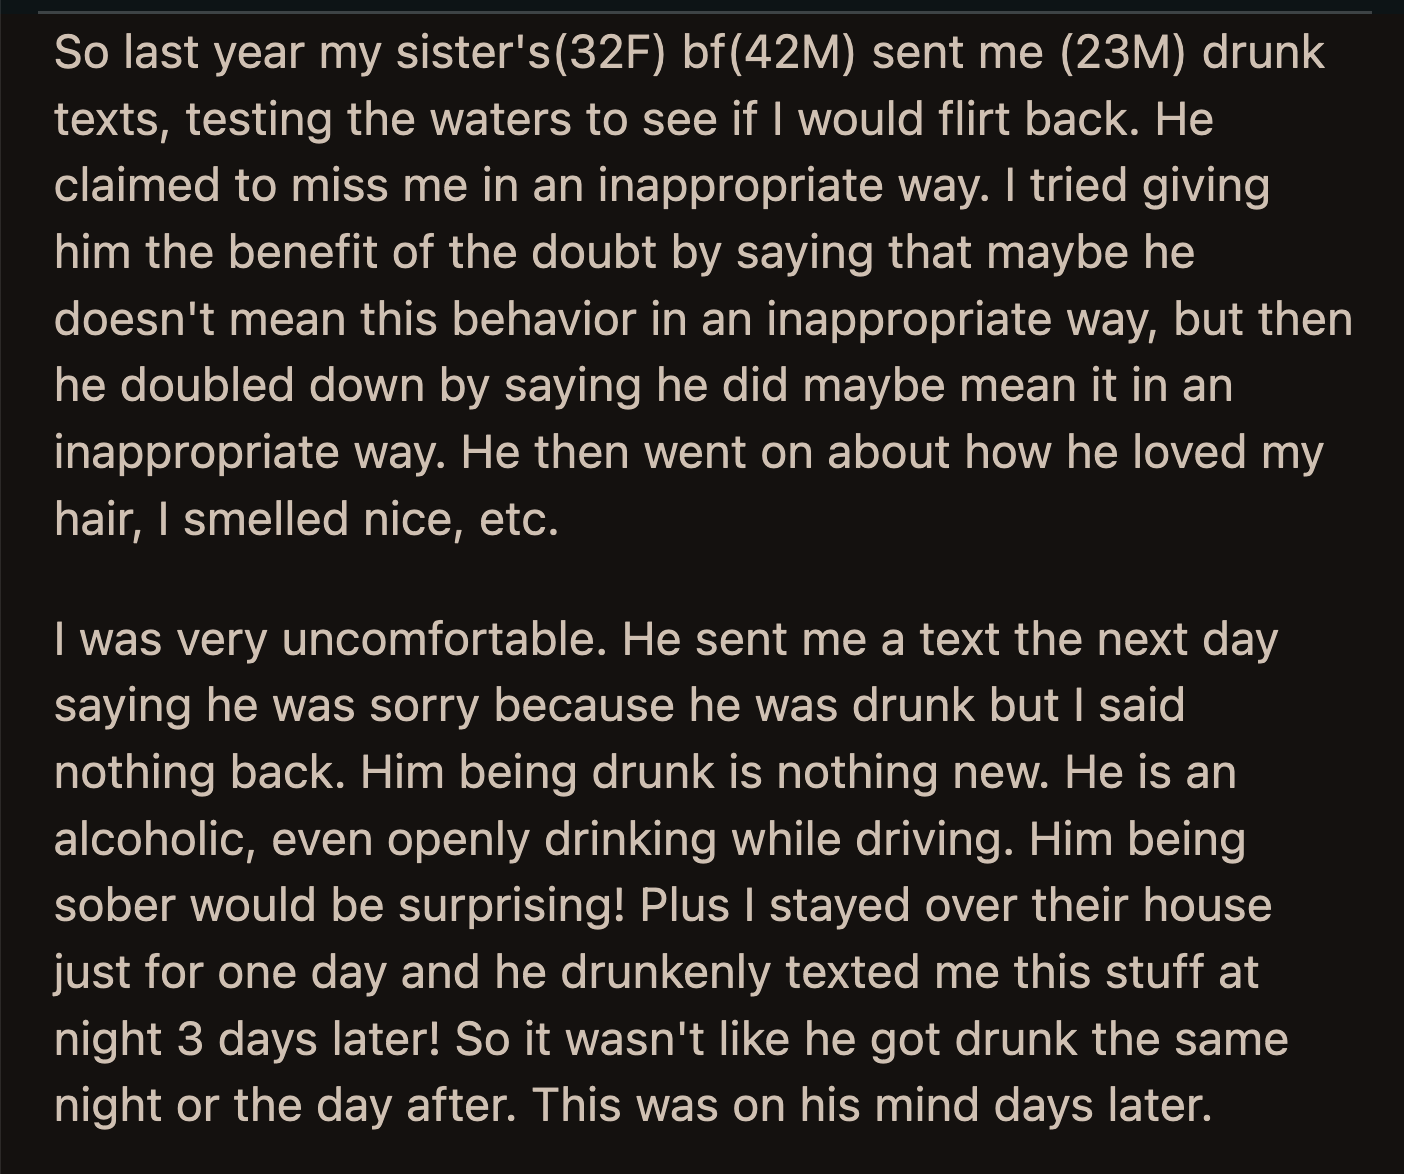 The next day, she changed her mind. She talked to her boyfriend. She was convinced that his messages to OP were not anything but a drunken mistake. She told OP she would 